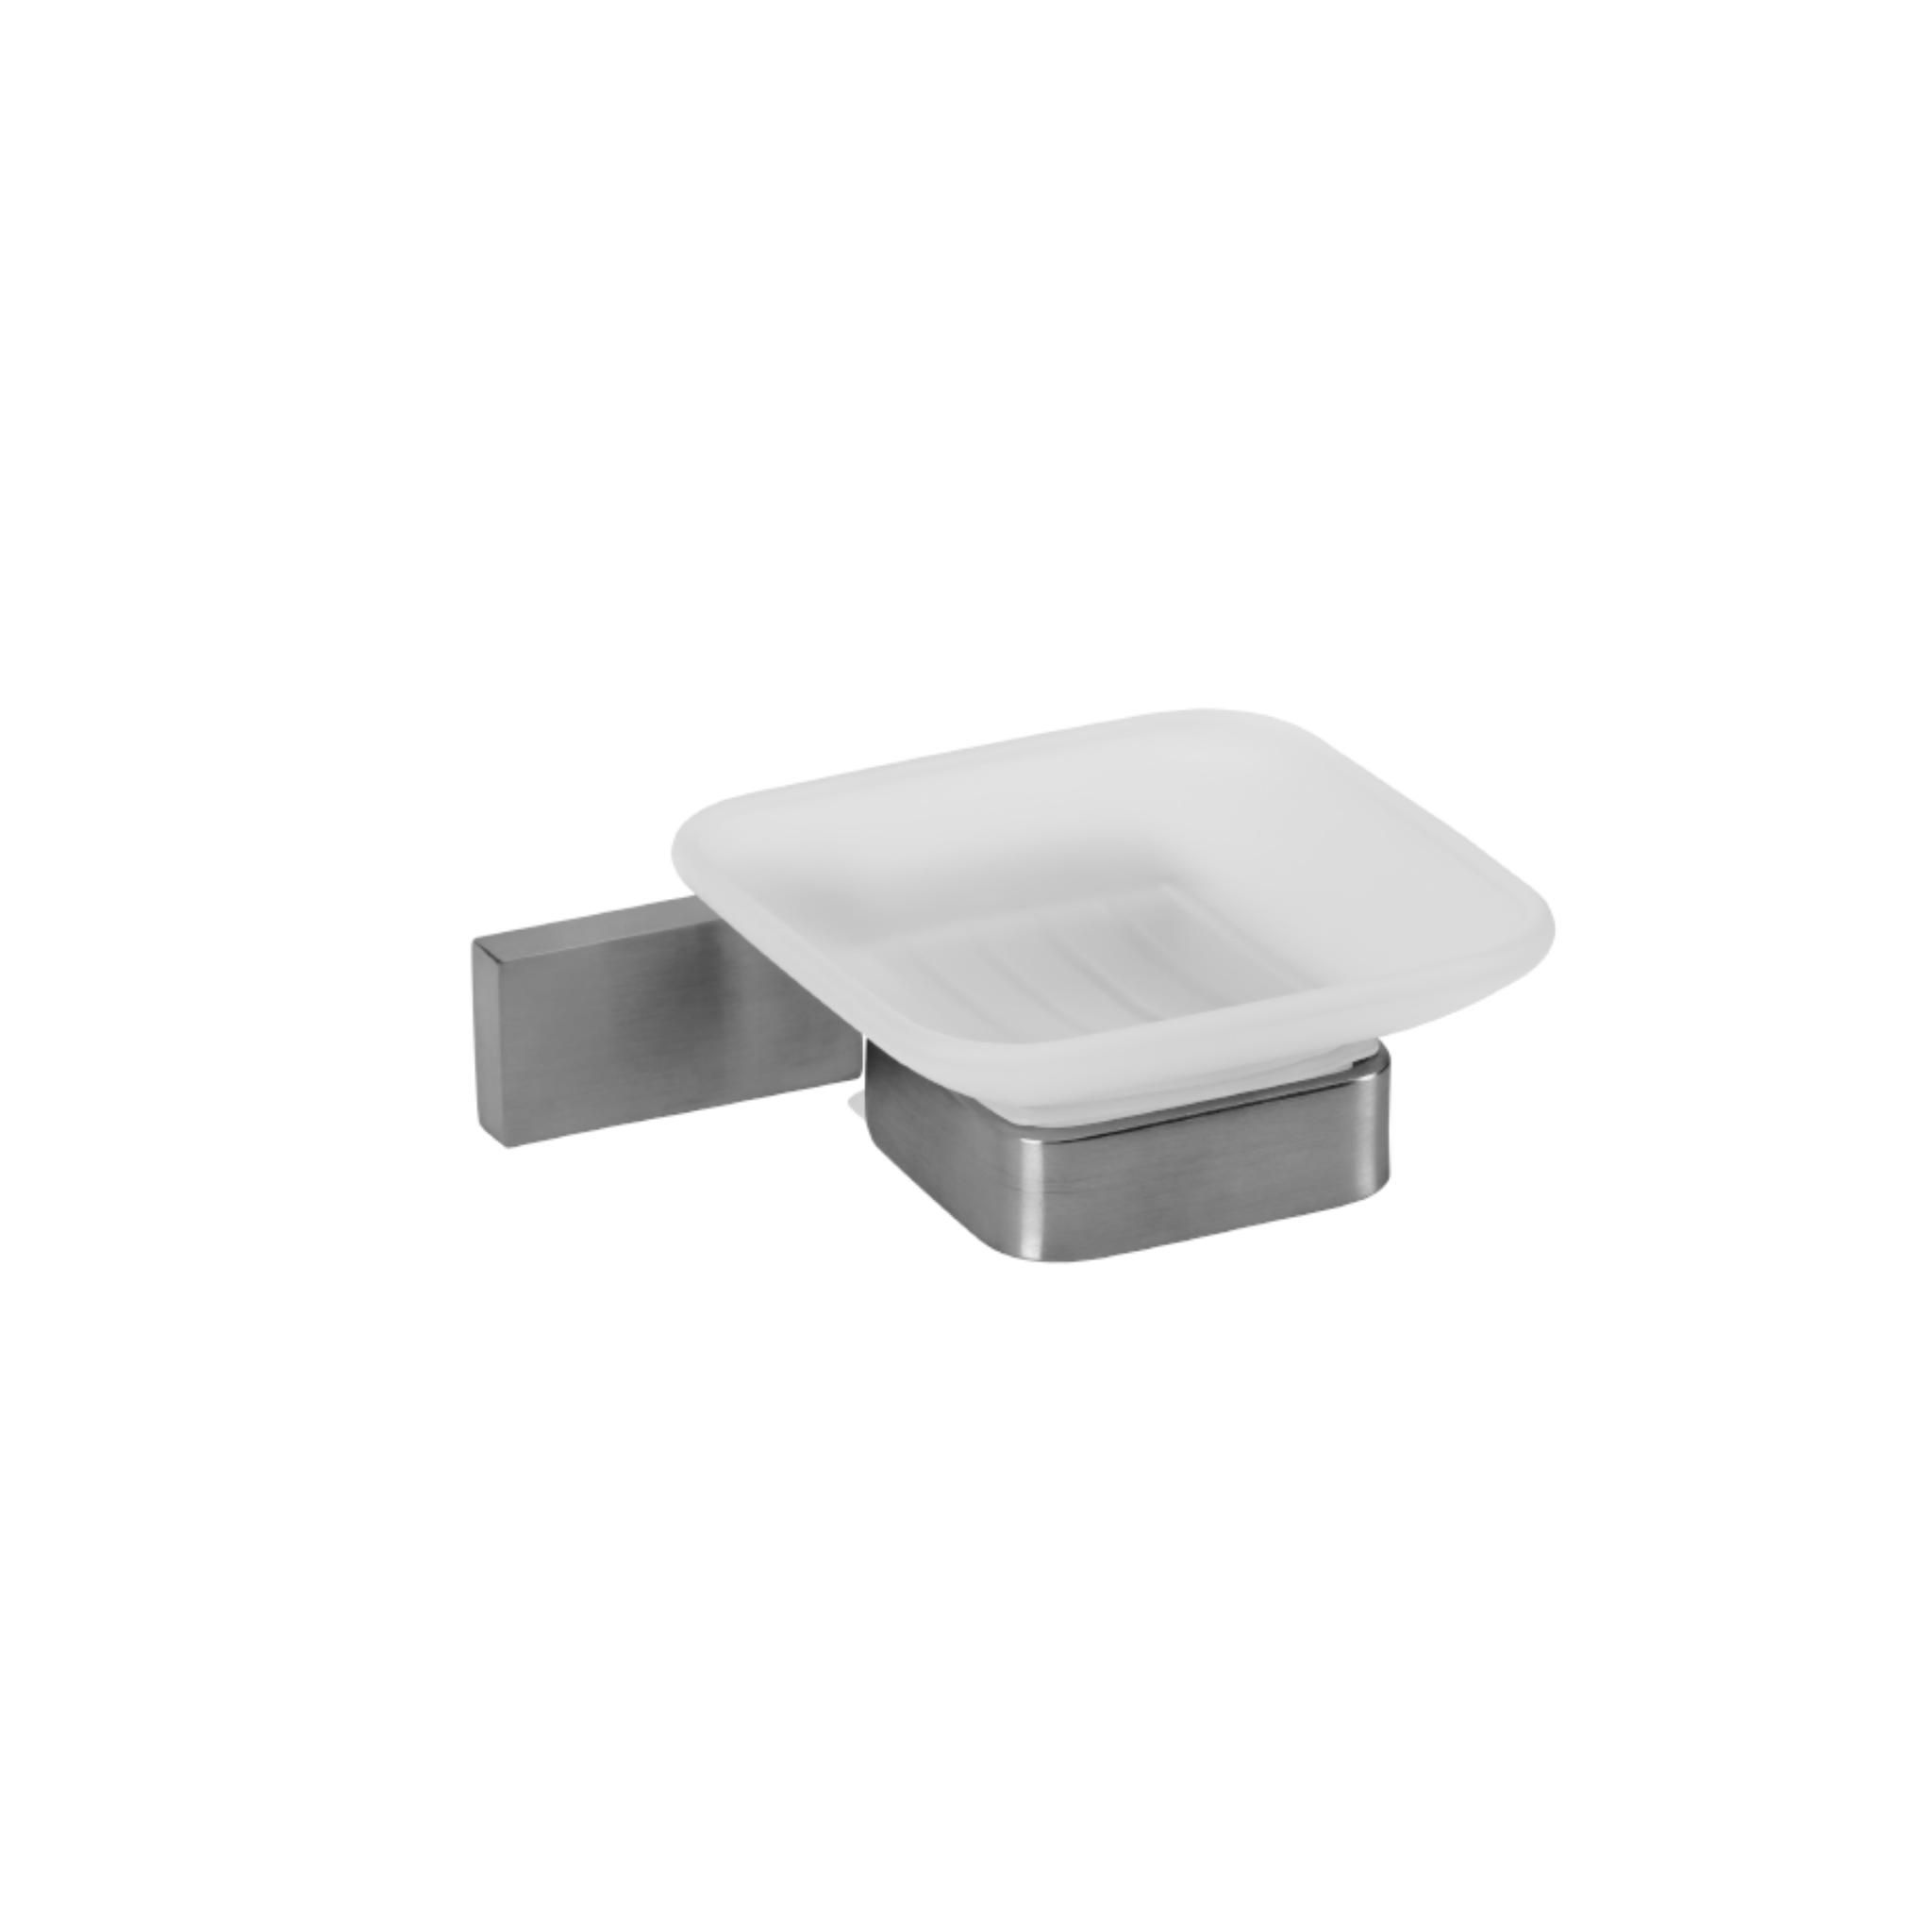 QS1527/SSS, Holder, Soap Dish, Square, Satin Stainless Steel, QS